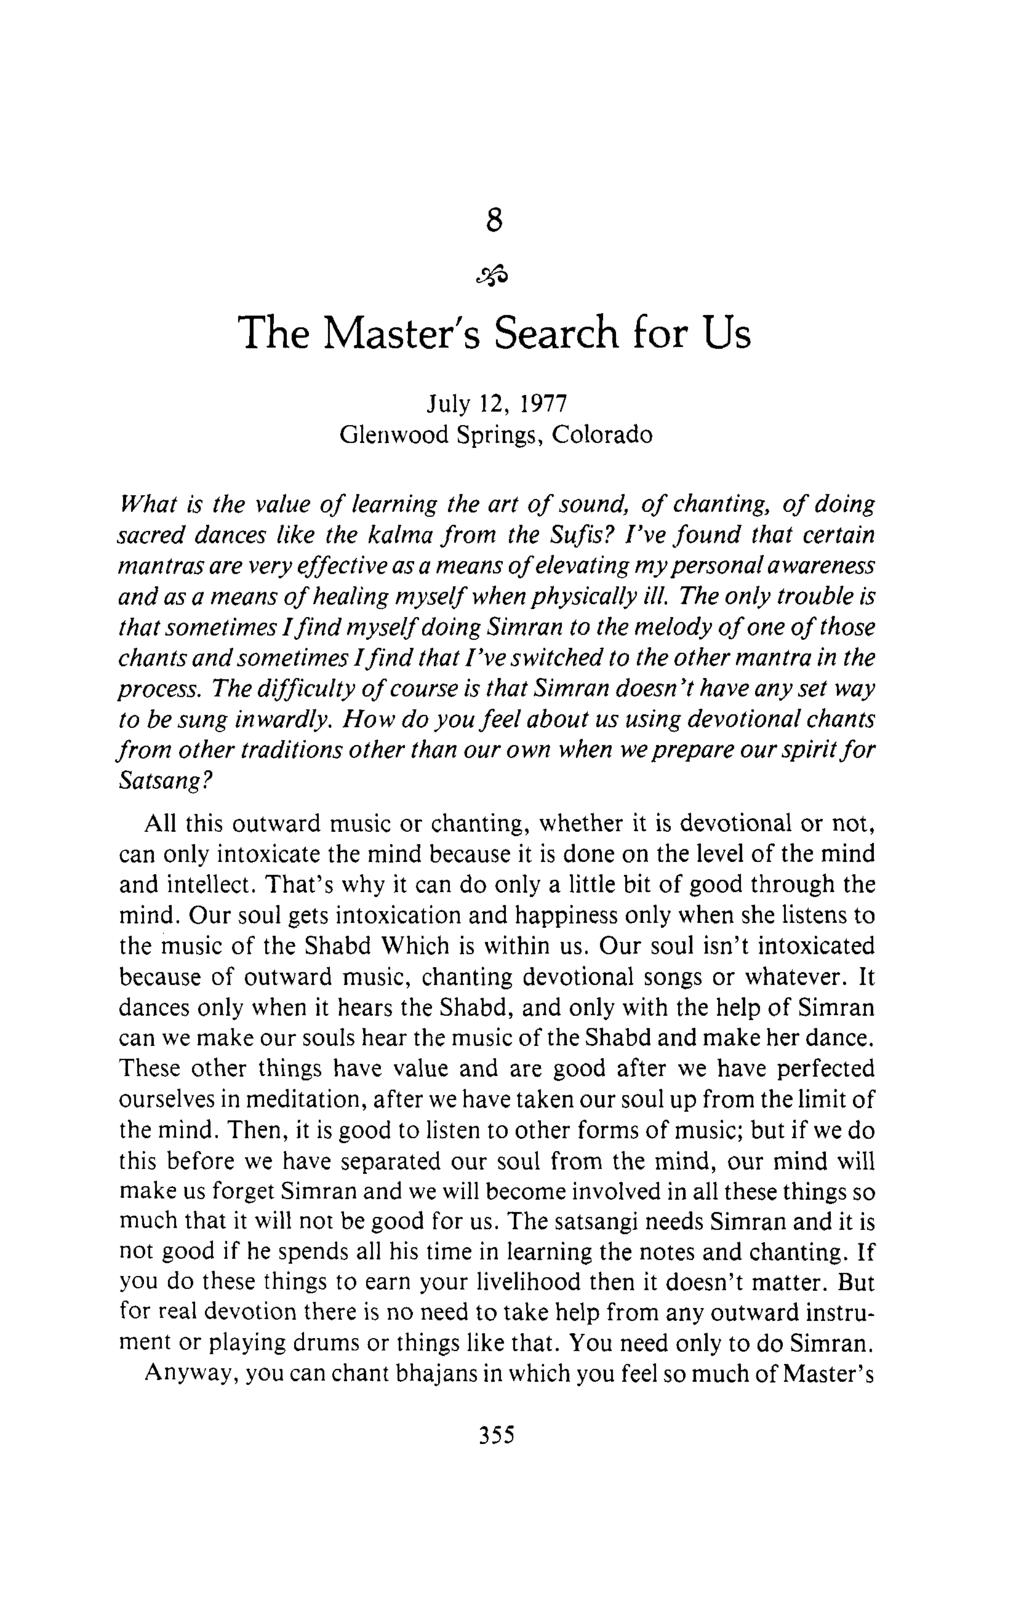 The Master's Search for Us July 12, 1977 Gleriwood Springs, Colorado What is the value of learning the art of sound, of chanting, of doing sacred dances like the kalma from the Sufis?